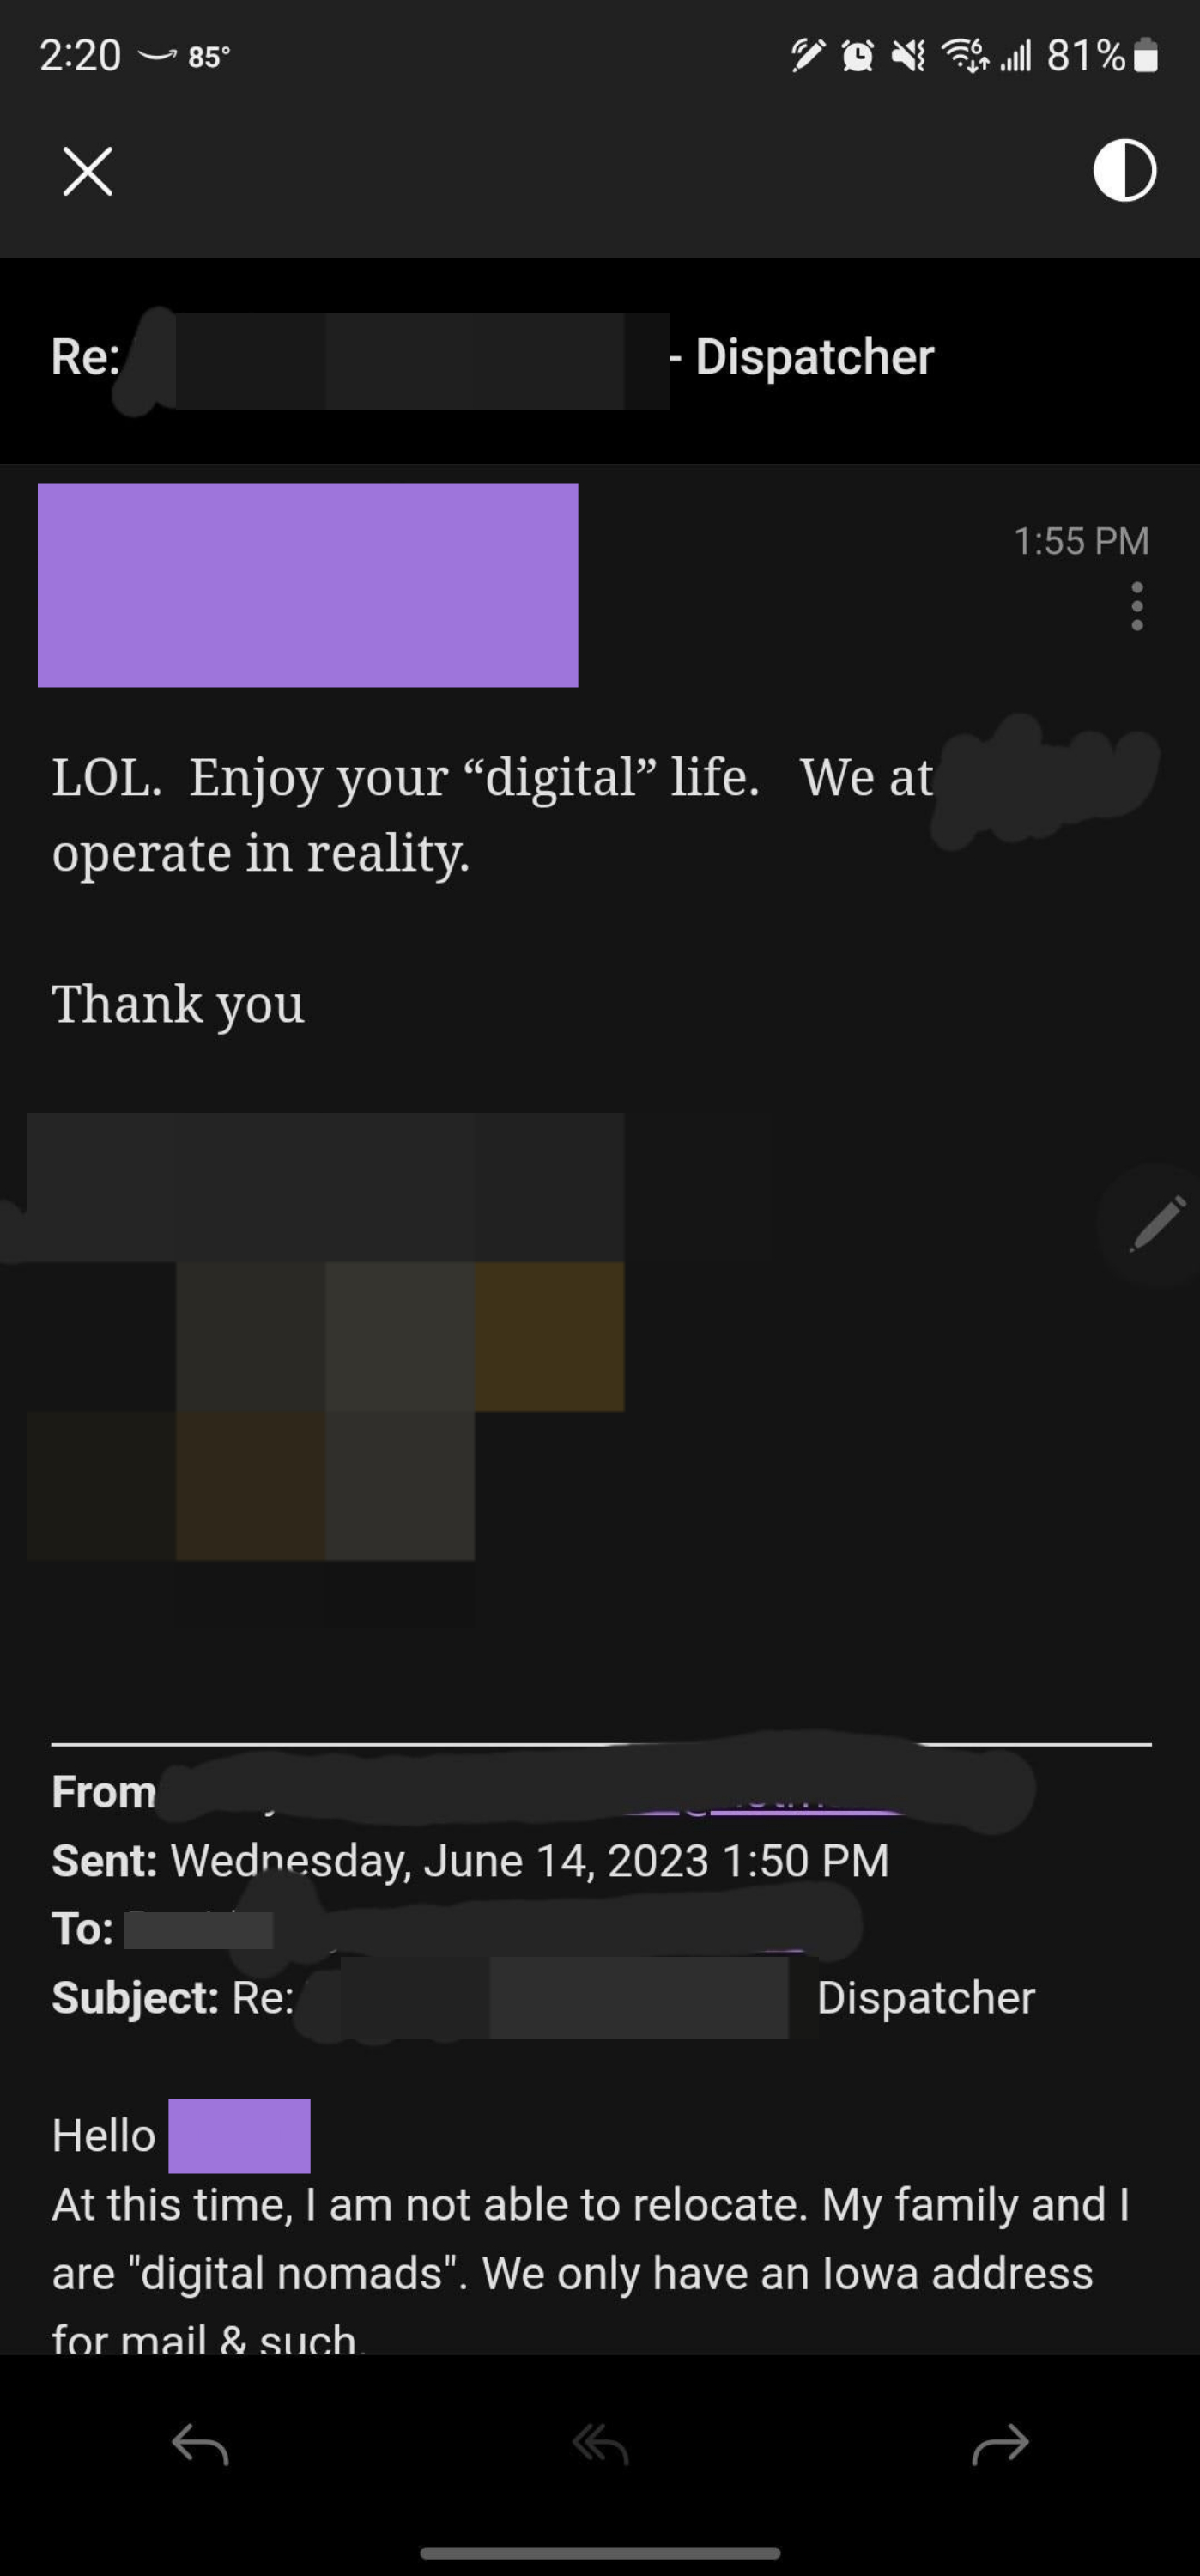 Person says they&#x27;re not able to relocate and their family are &quot;digital nomads&quot; and have an Iowa address for mail, and response is, &quot;Enjoy your &#x27;digital life&#x27;; we operate in reality&quot;